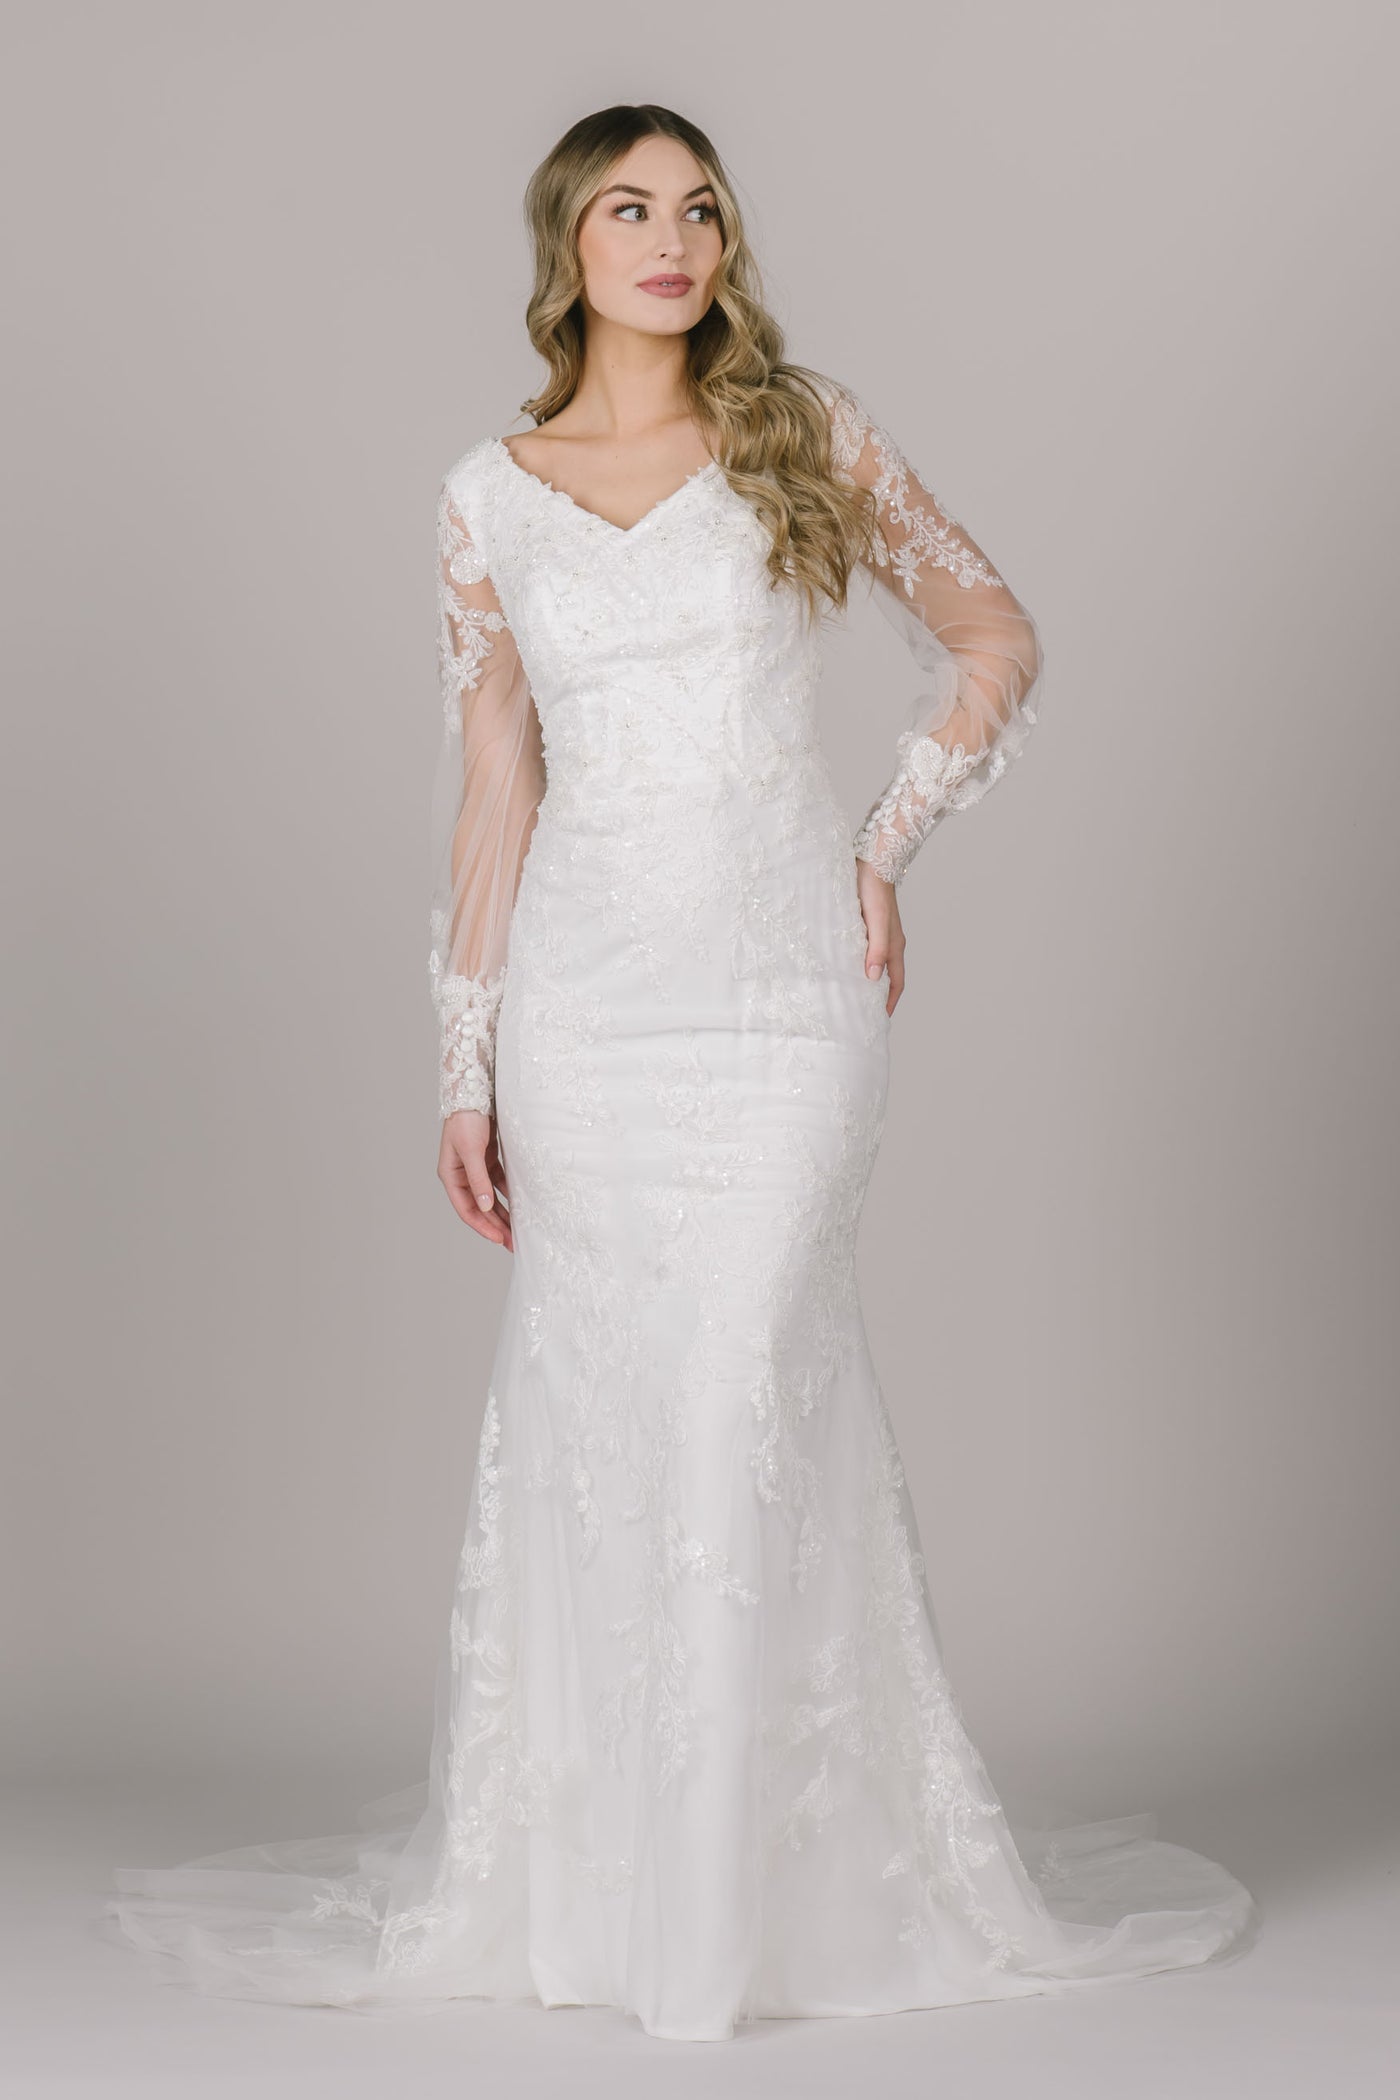 A picture of a fitted modest wedding dress with a beautiful beaded lace detail, v-neckline, and bishop sleeves